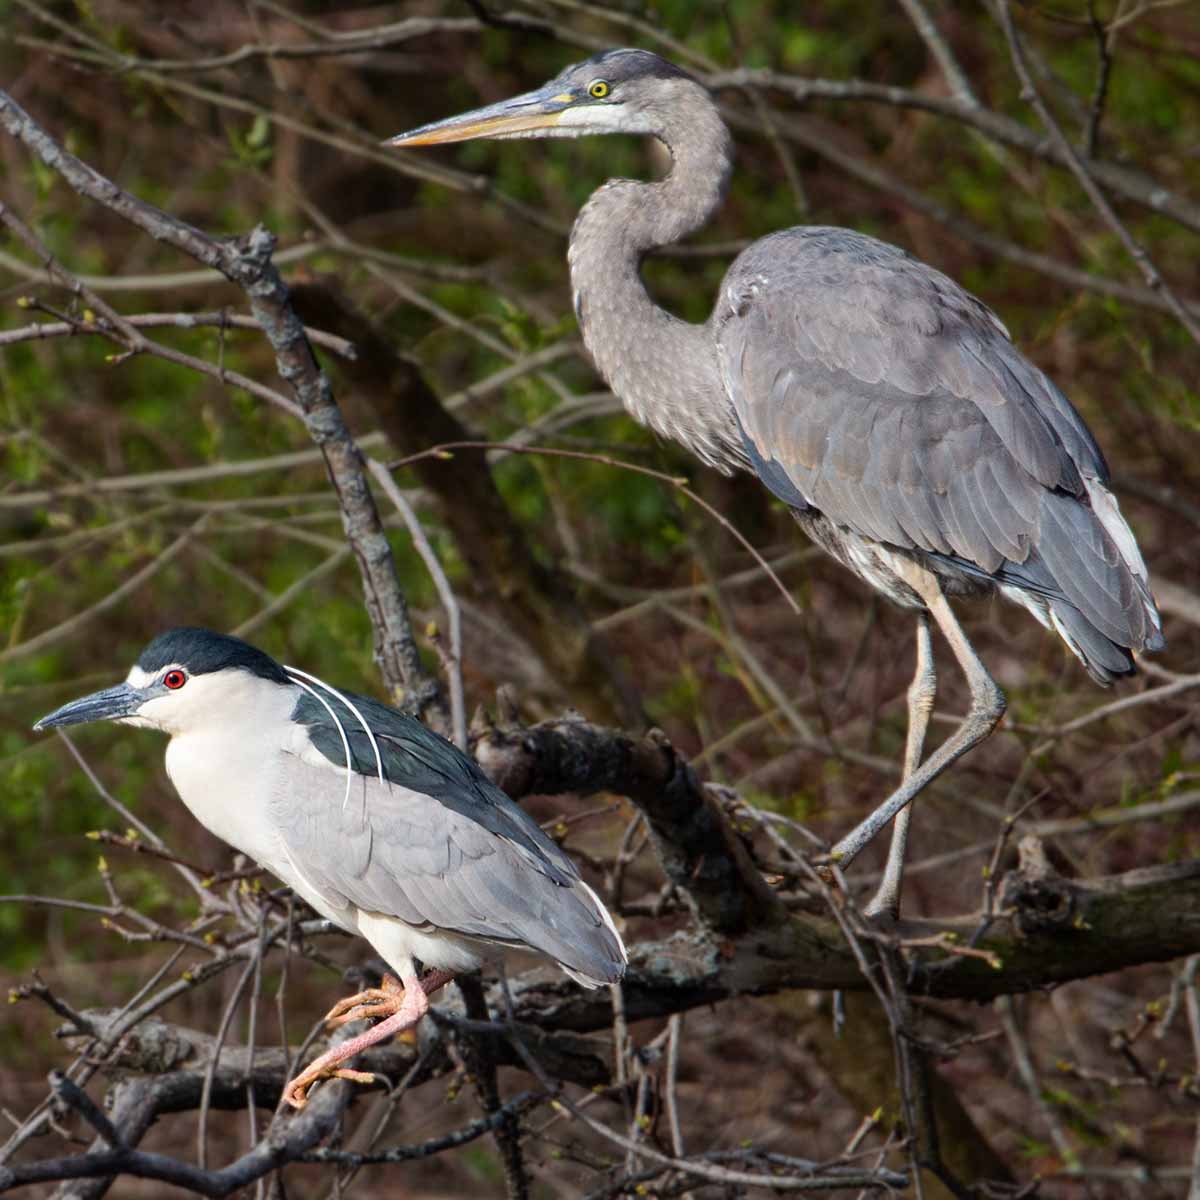 The image depicts two species of herons perched in a branchy area above a body of a pond. A black-crowned night heron stands alert, with a stocky build, short neck, and distinctive black crown and back contrasting with its white underparts. Alongside, a majestic great blue heron stands tall, with long legs, a slender neck, and grayish-blue plumage. Both birds have sharp, pointed beaks adapted for catching fish and other aquatic prey. The branchy, wooded setting provides ideal nesting and foraging habitat for these two heron species, which are commonly found in wetland environments across North America.
